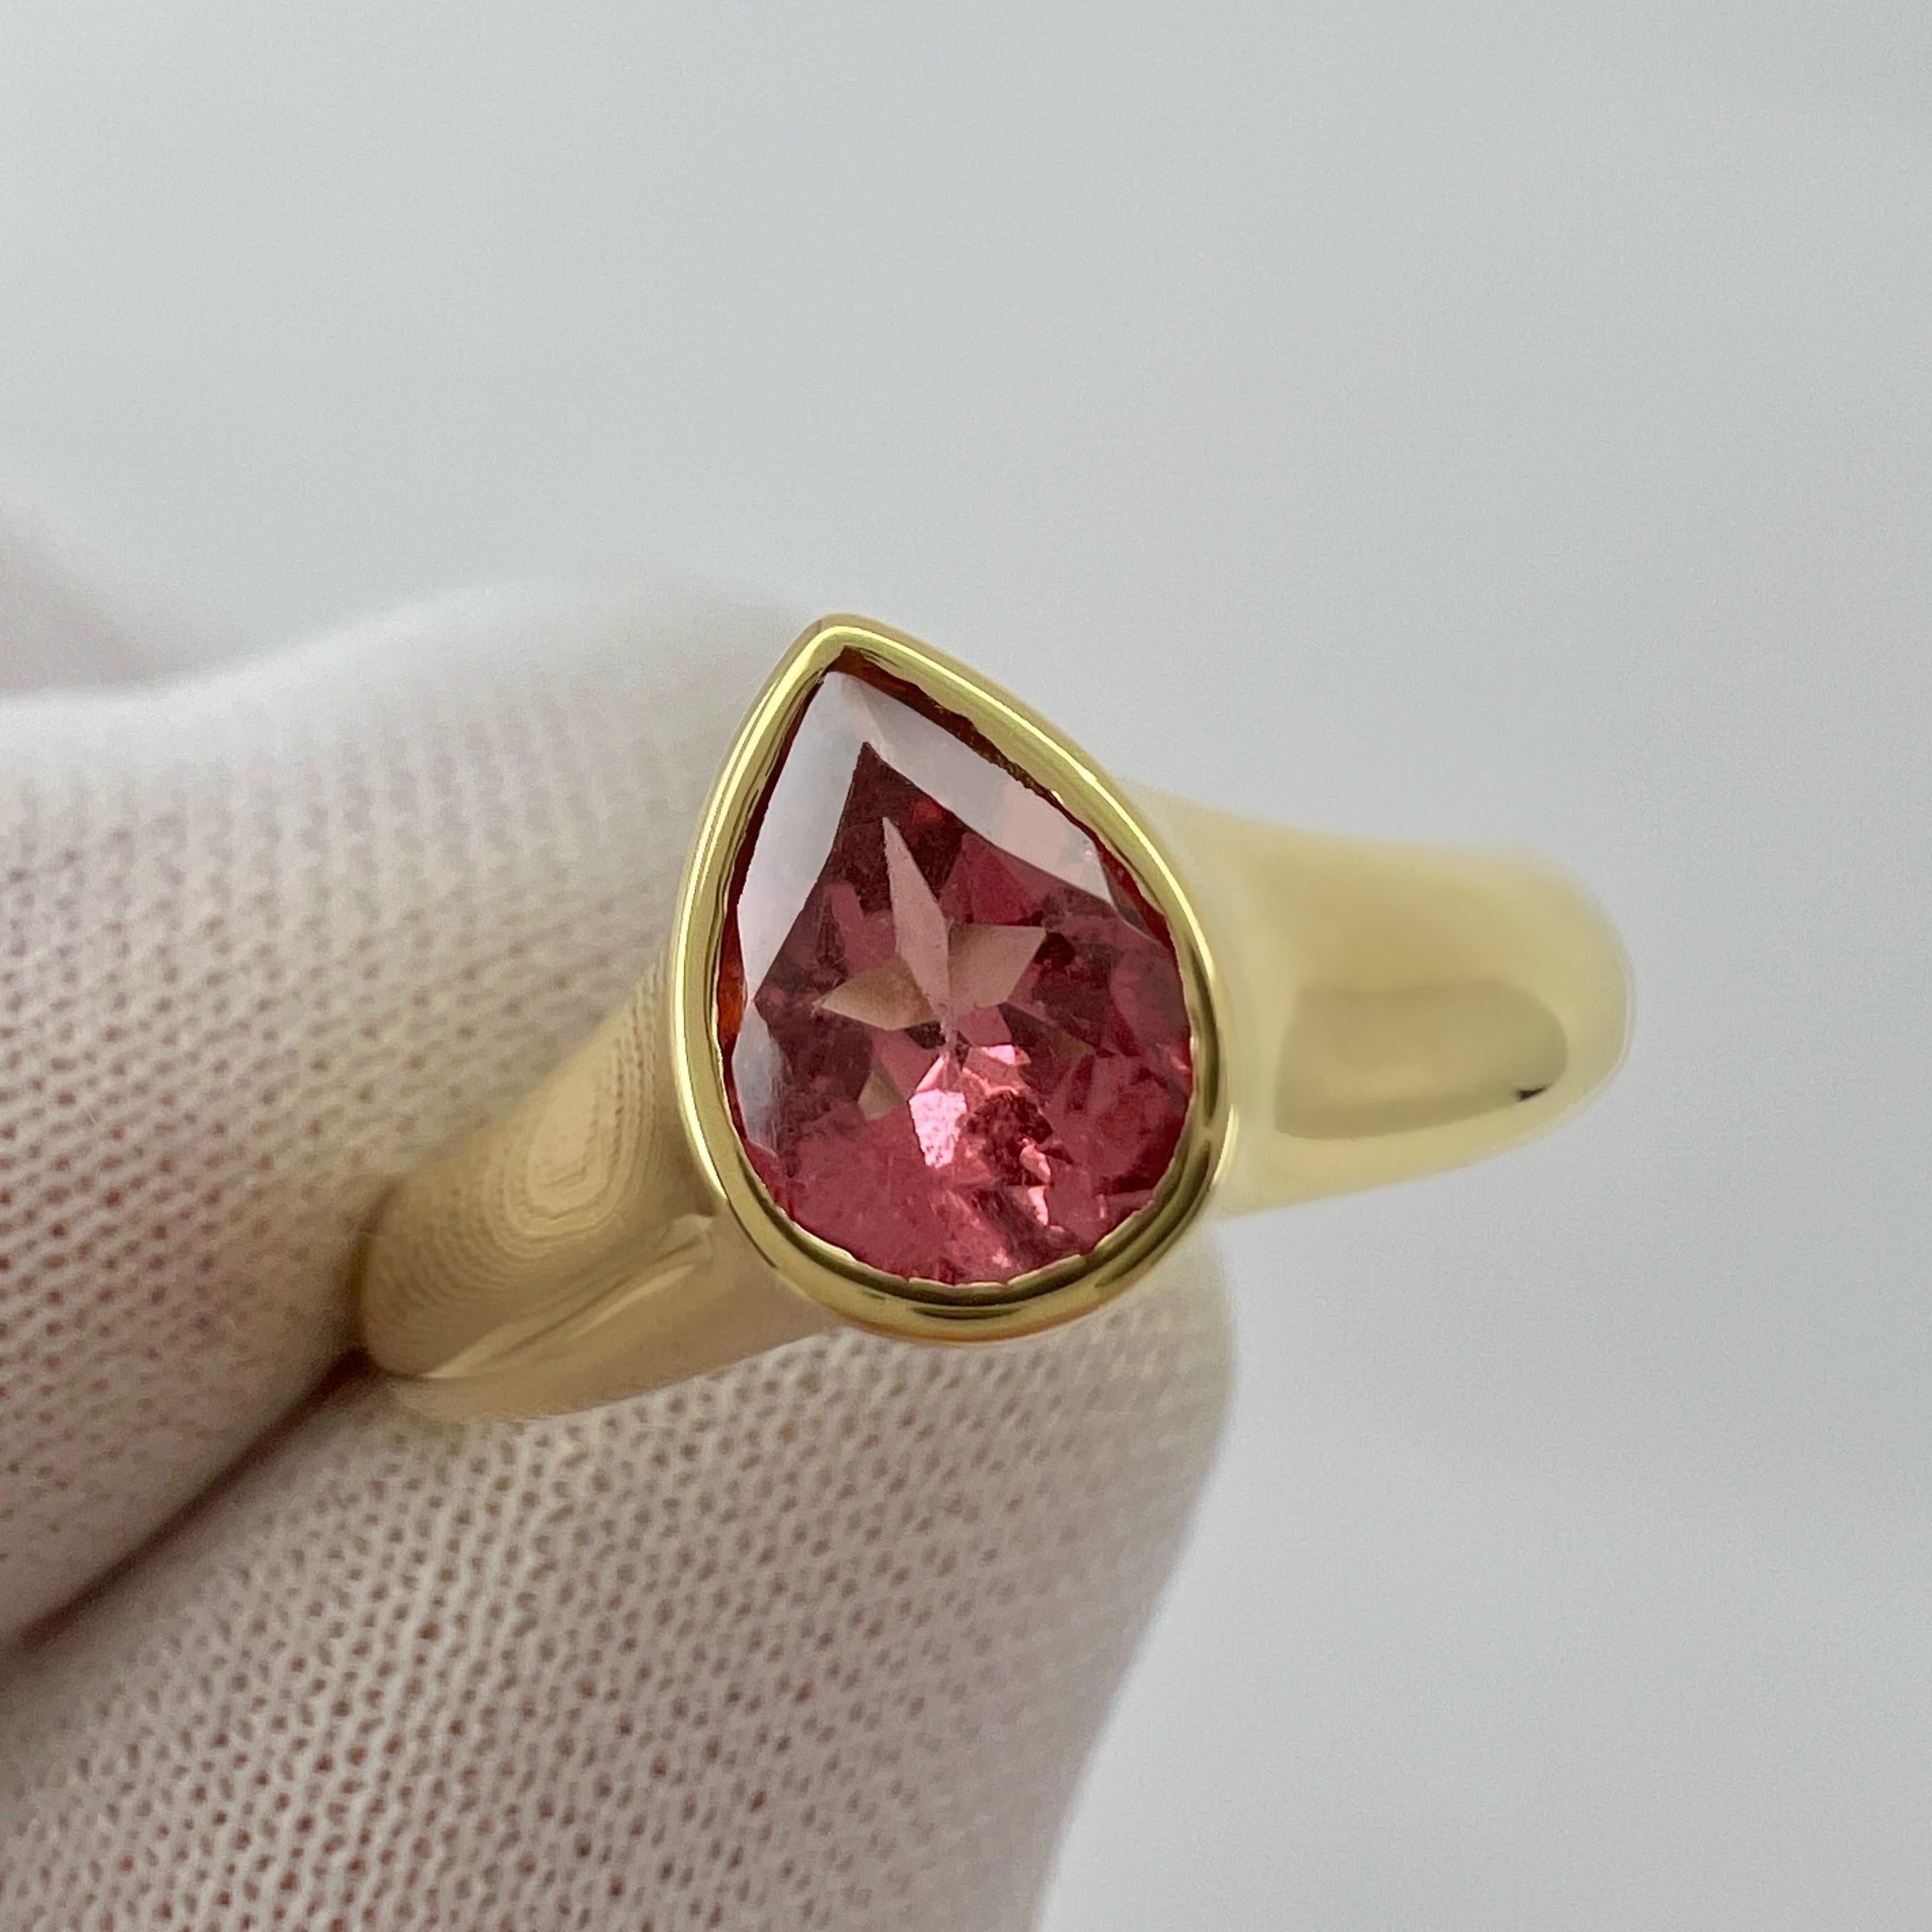 Rare Vintage Van Cleef & Arpels Pink Tourmaline Pear Cut 18k Yellow Gold Ring For Sale 1